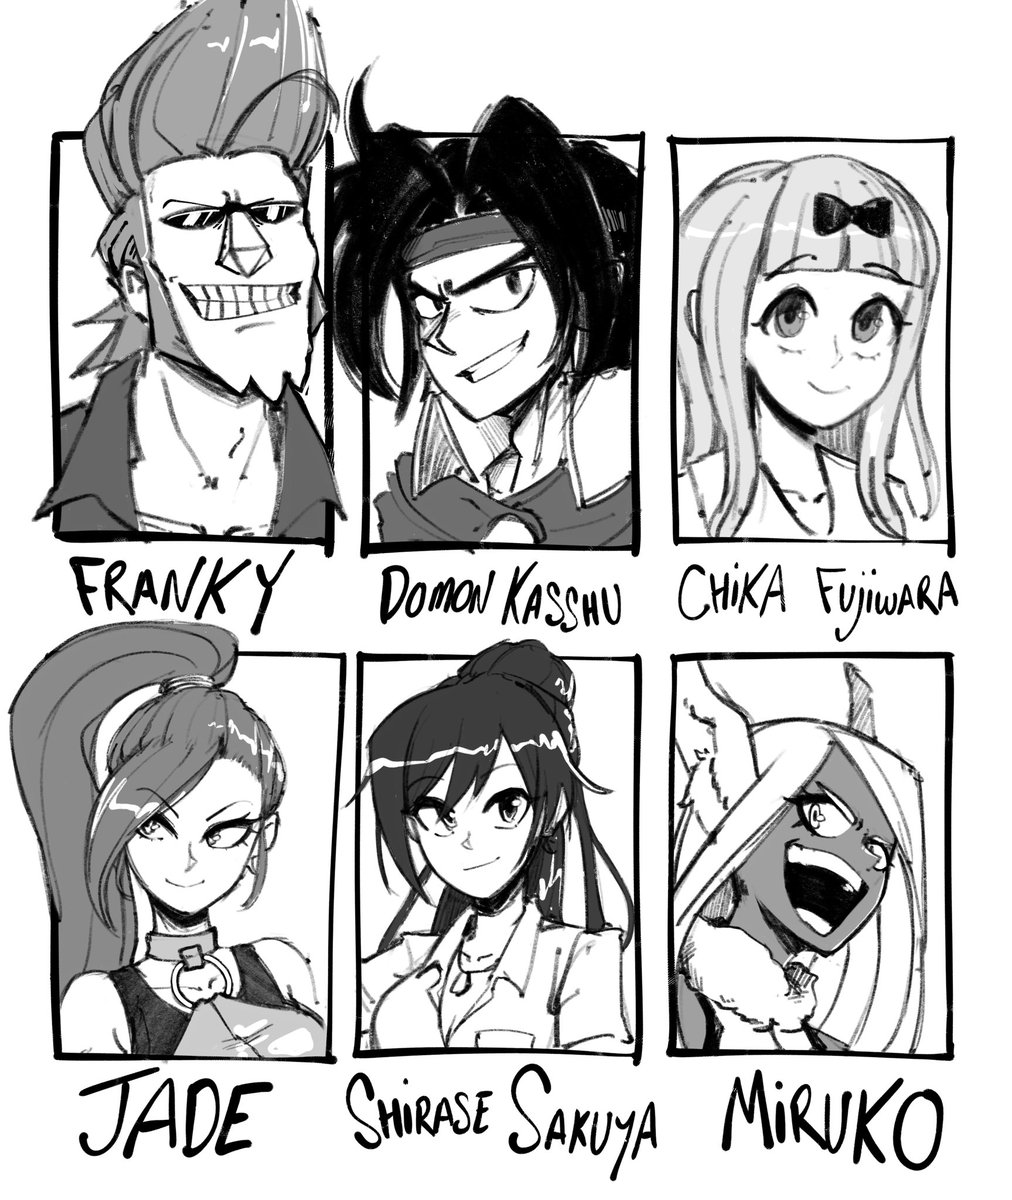 Here is my #sixfanarts thing. The characters were suggested by my patrons. Doing this was actually really fun too haha 